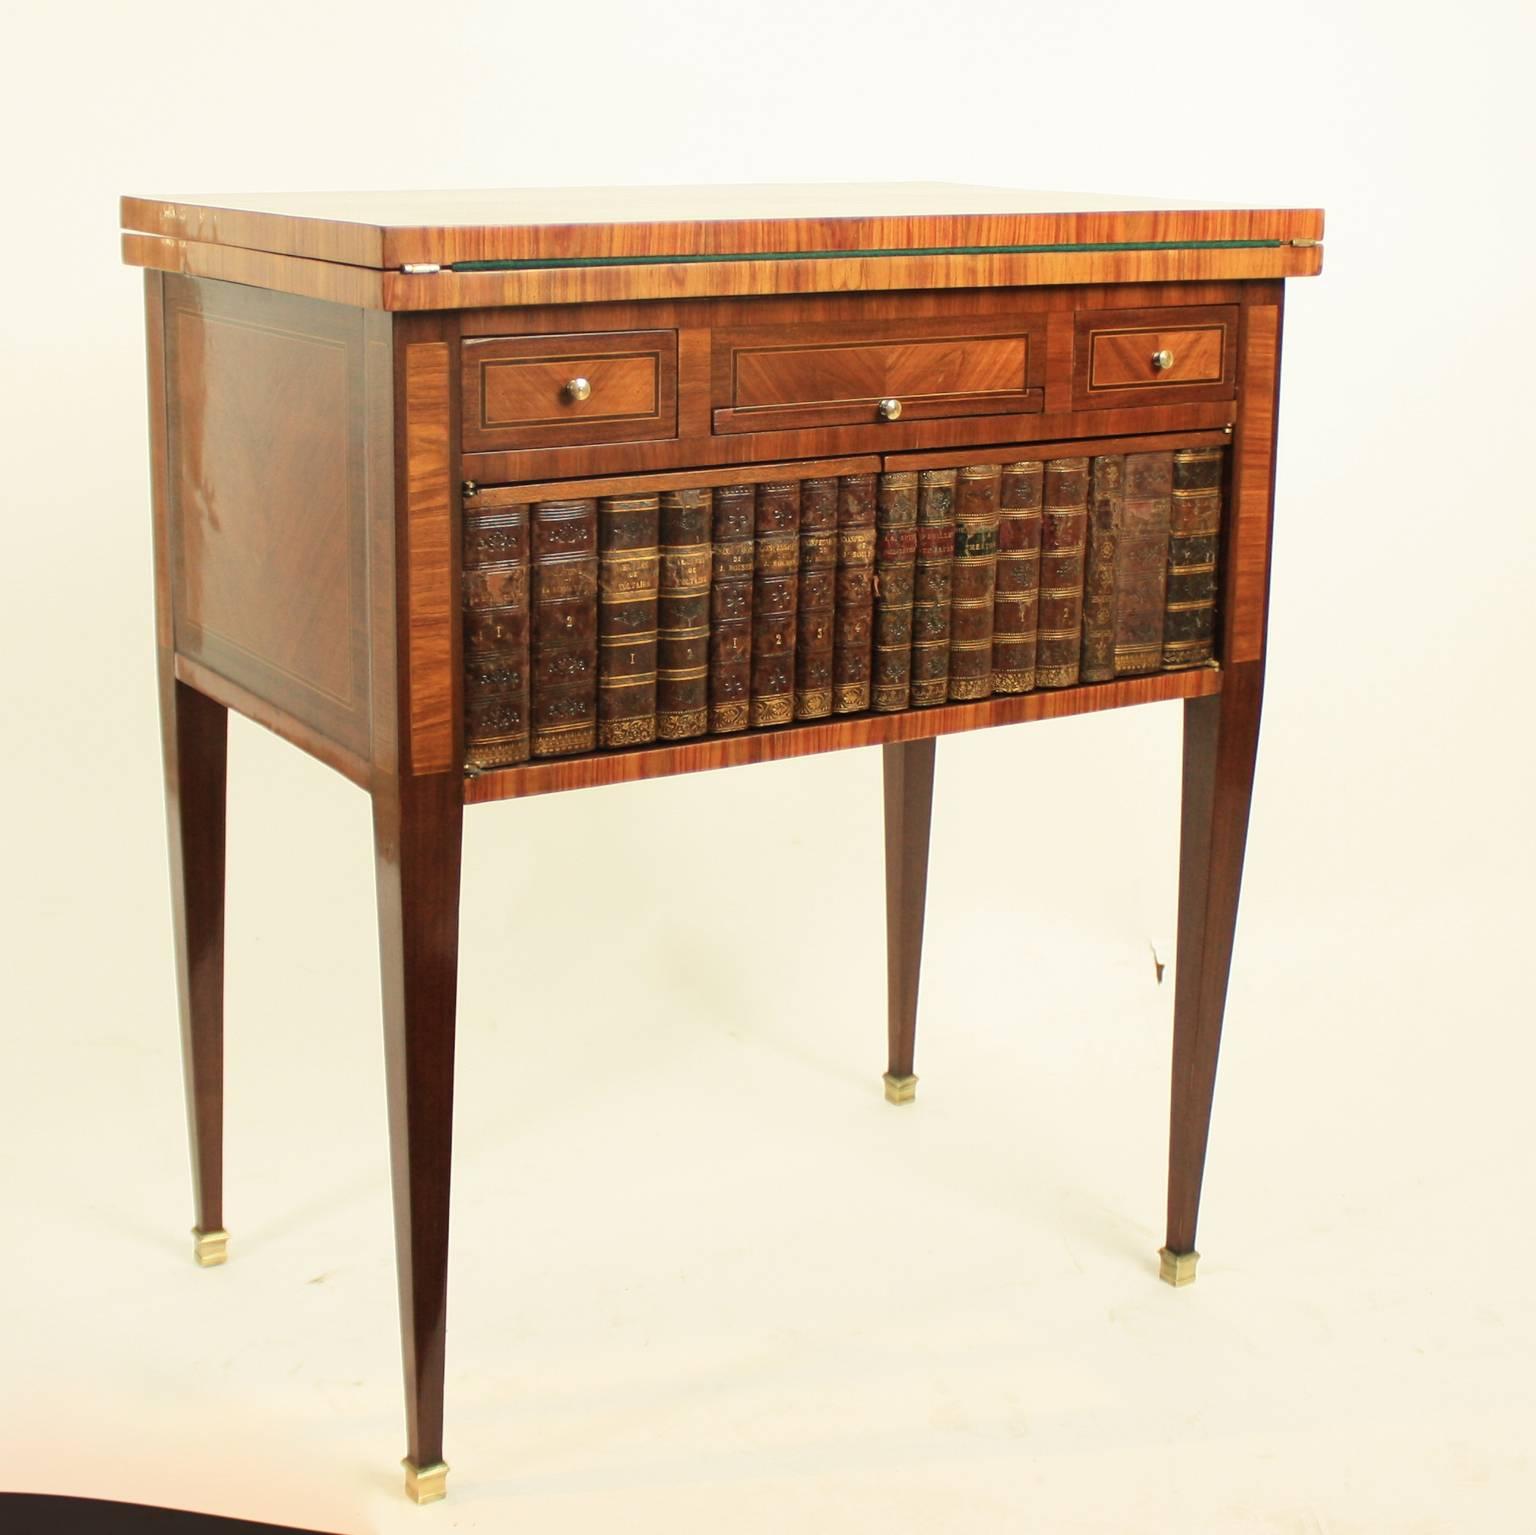 A 19th century French game table with chess board marquetry on top unfolding to double the size revealing a green felt covering. The frieze with two drawers and a centered pull-out slide above a two doors featuring the spines of vintage leather